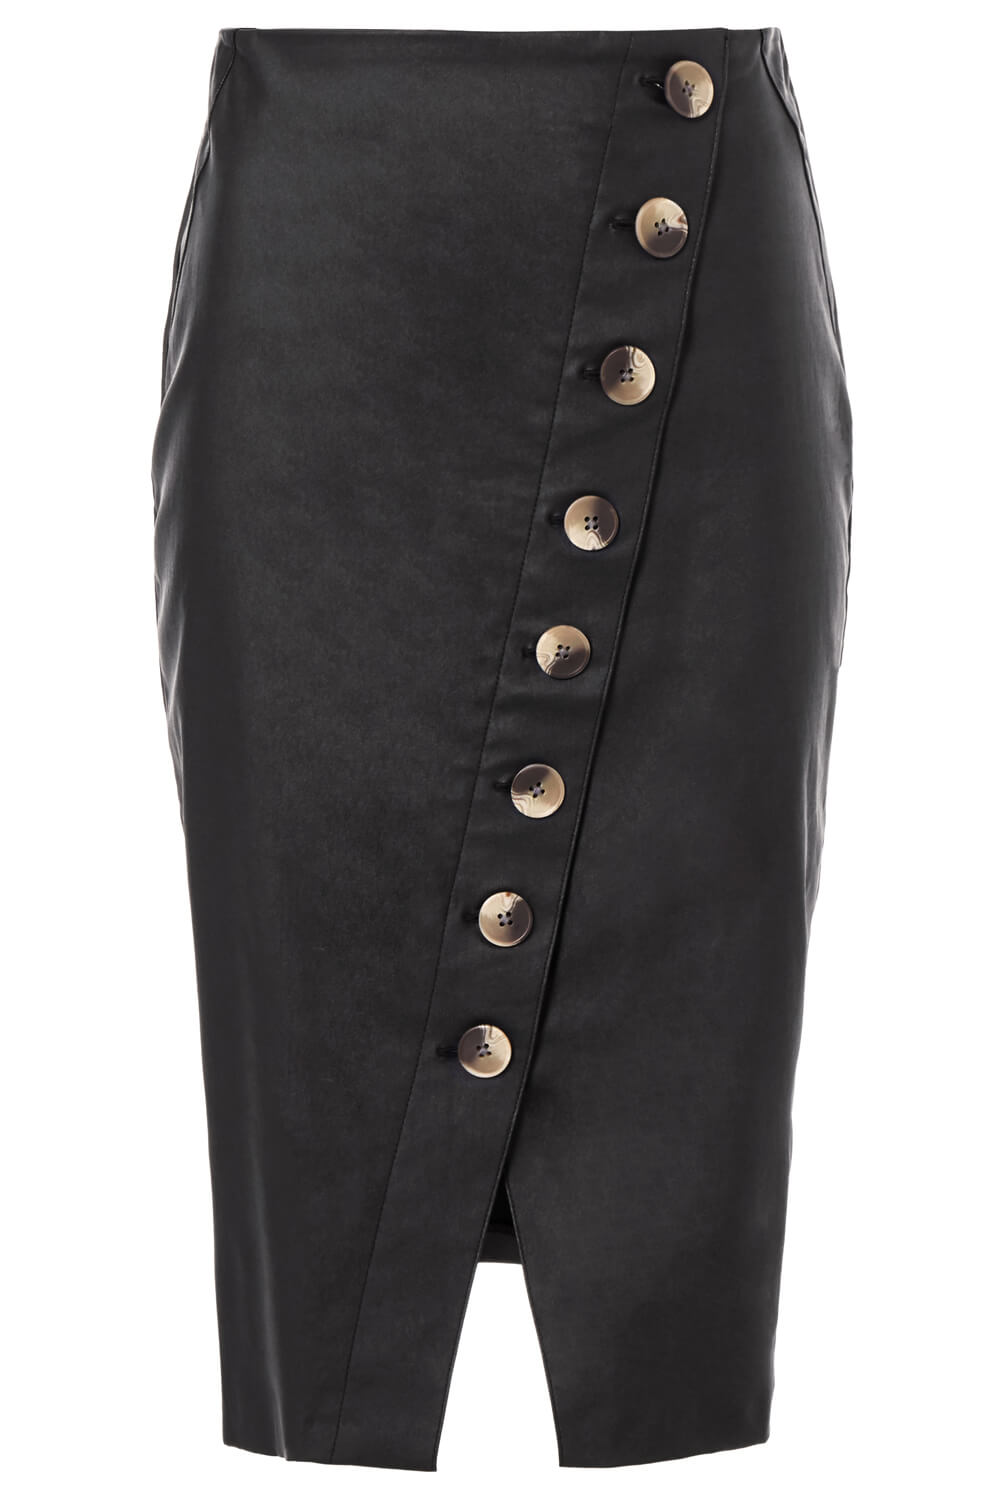 Black Faux Leather Button Midi Skirt, Image 7 of 7